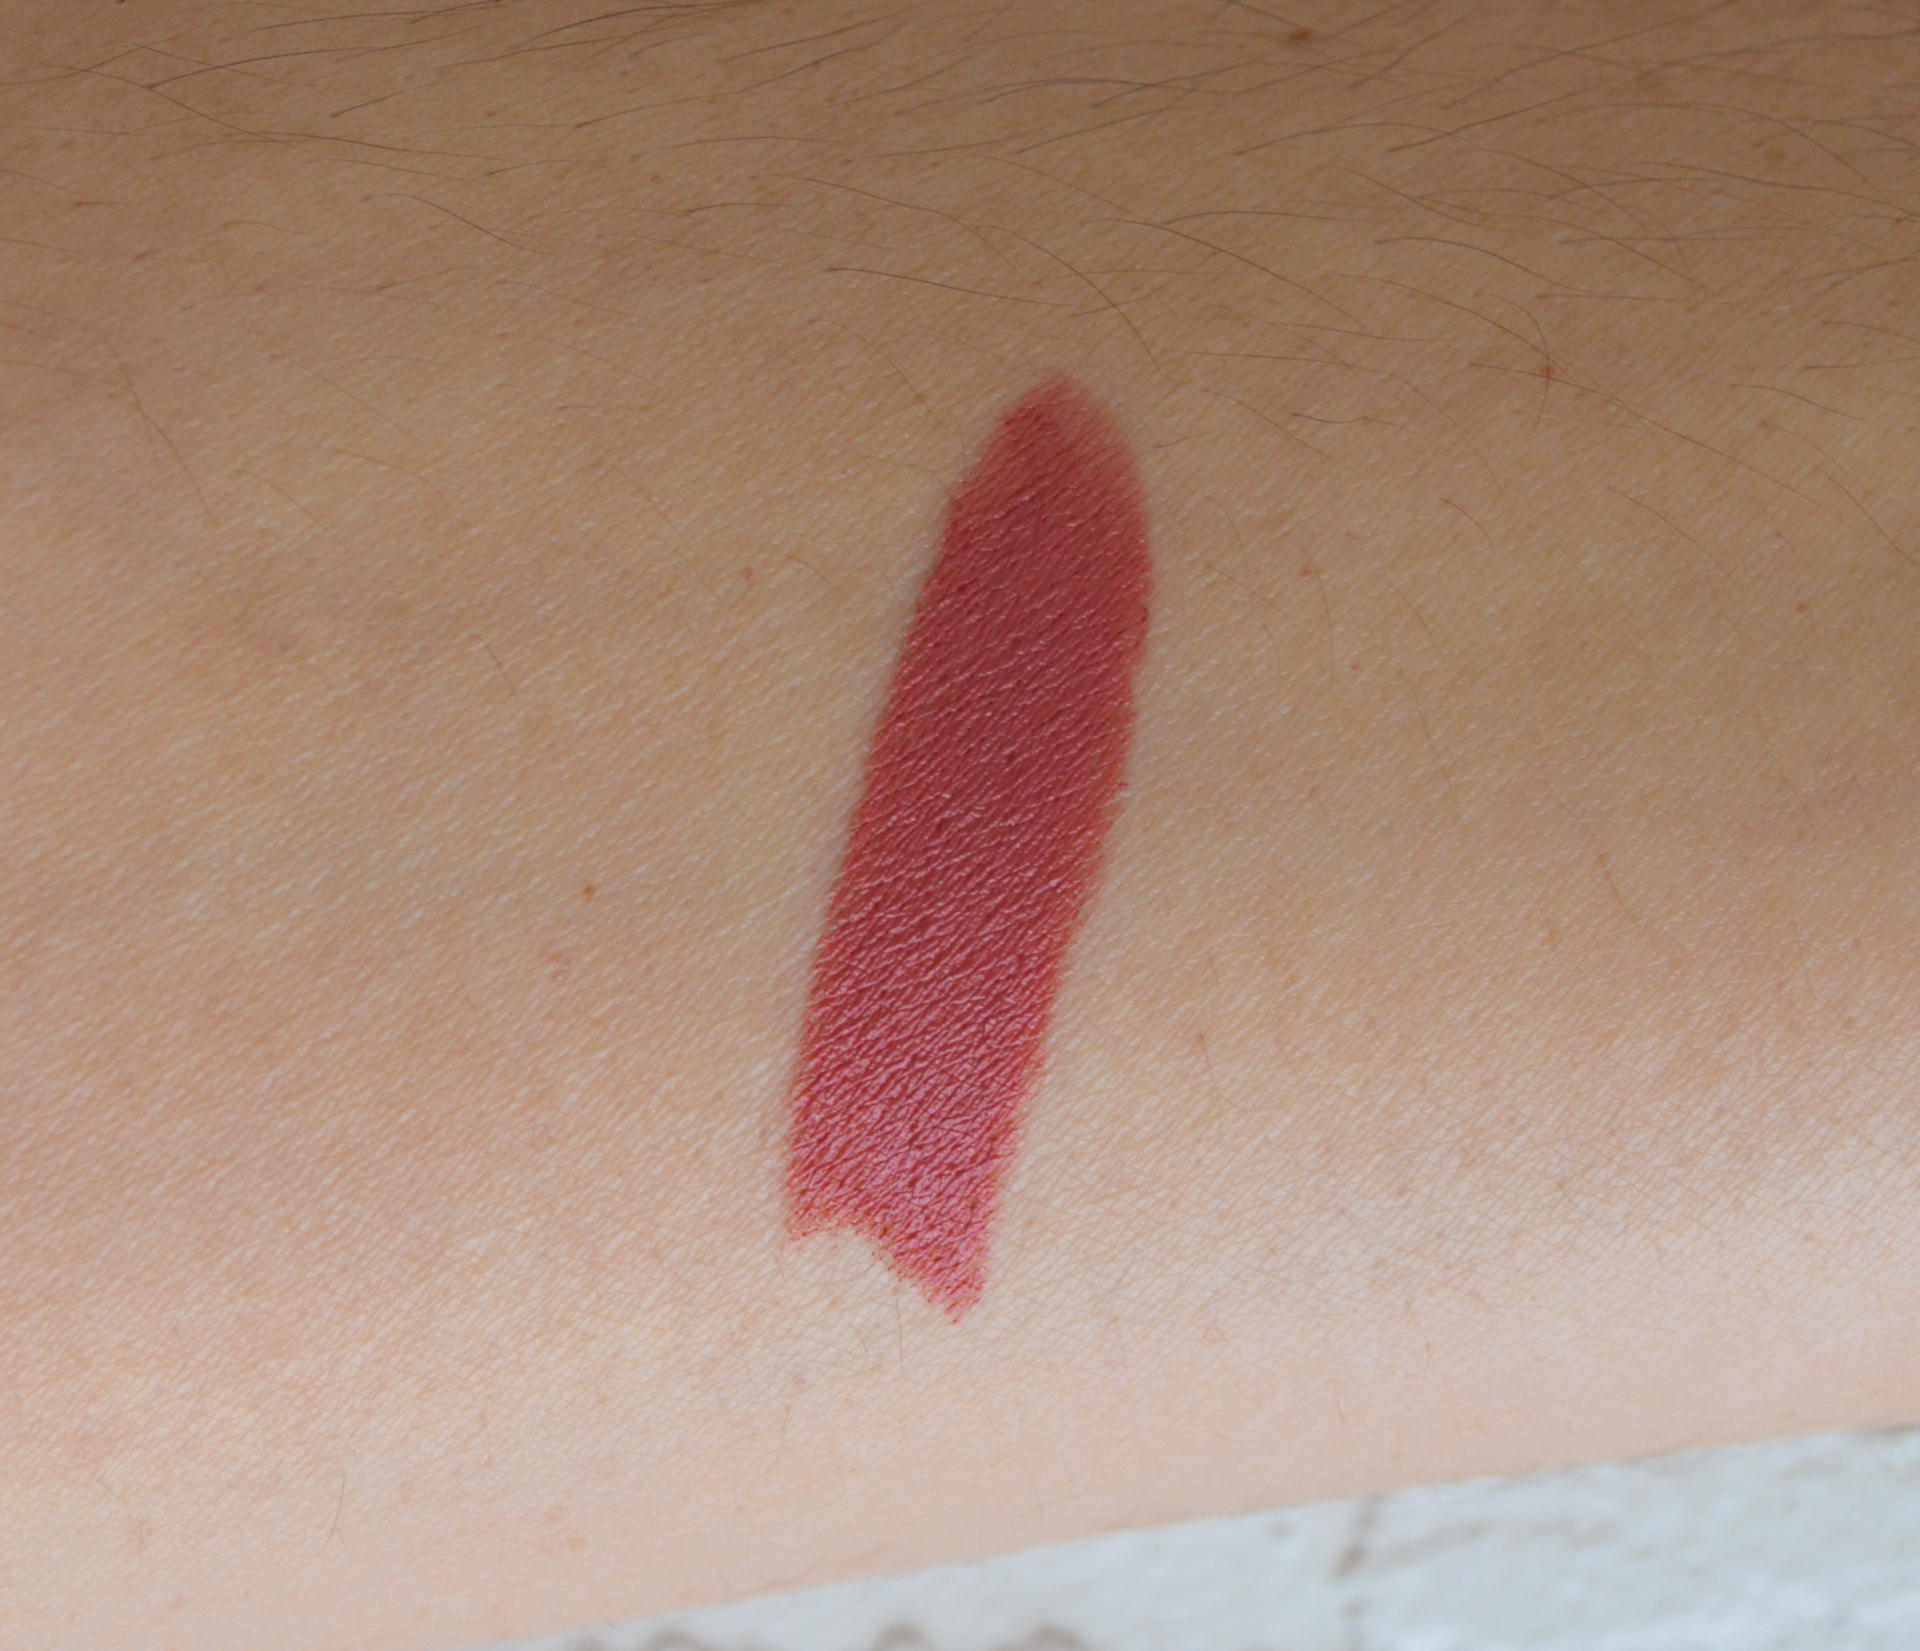 Audacious Lipstick Holiday Kiss Collection in Anita